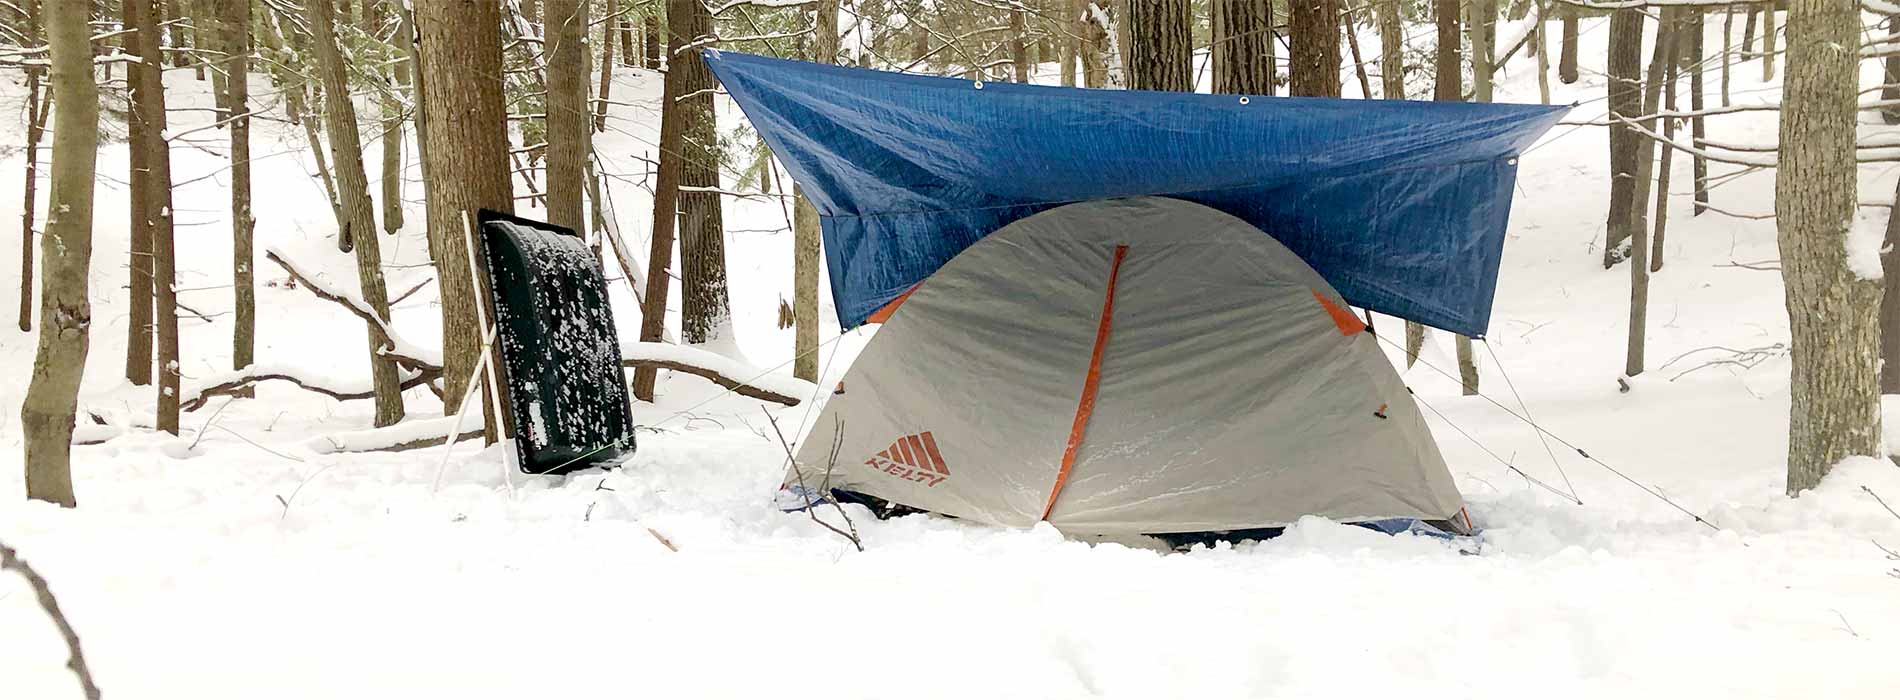 Solo backcountry winter wild camping - Some Bold Adventure